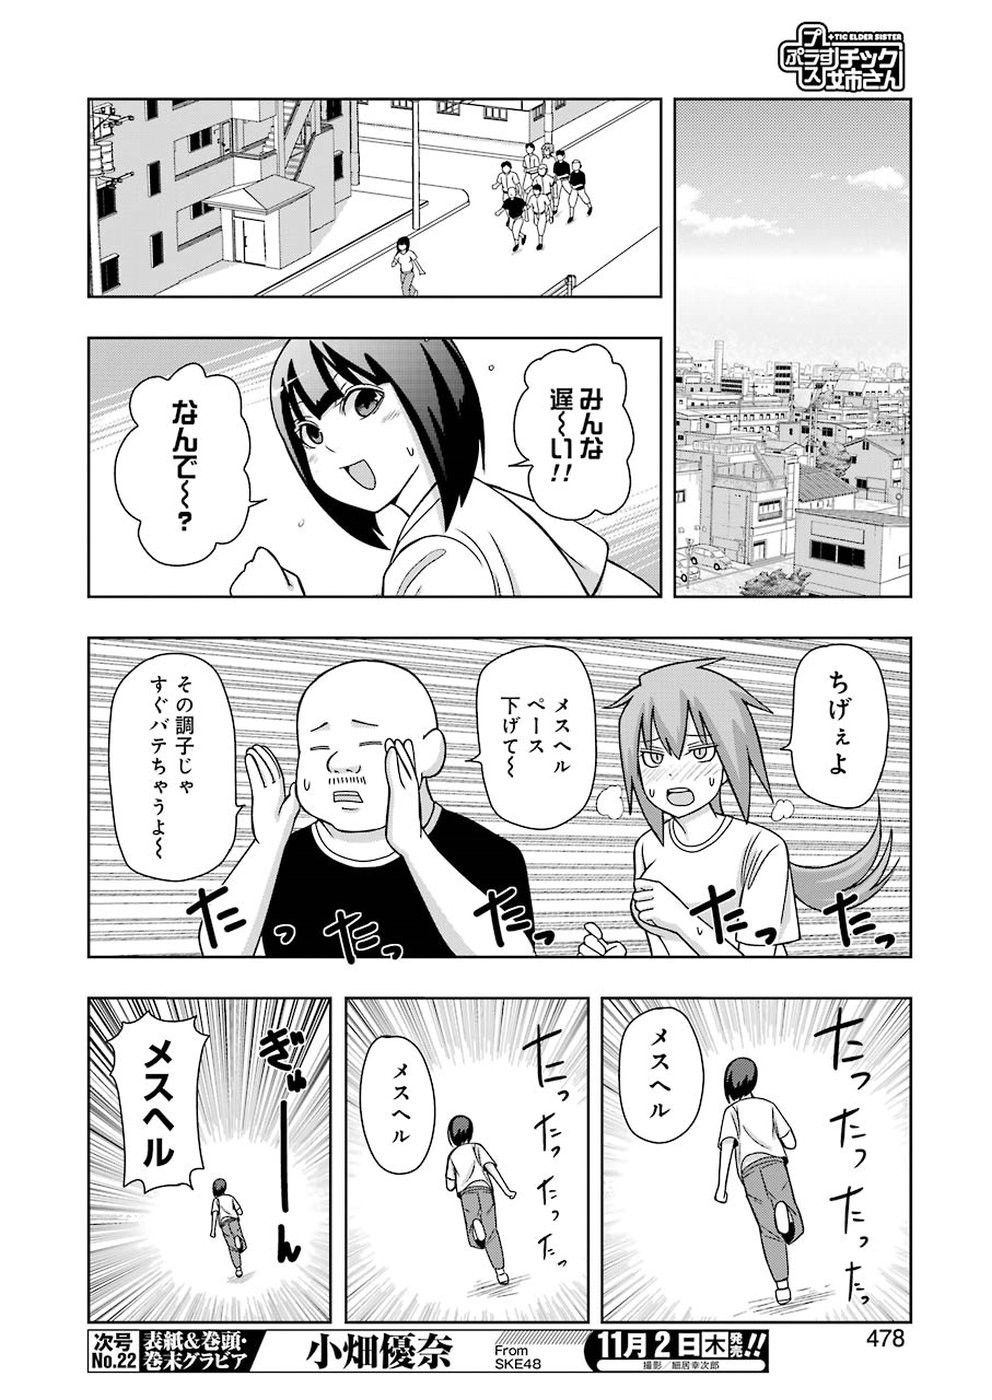 + Tic Nee-san - Chapter 154 - Page 4